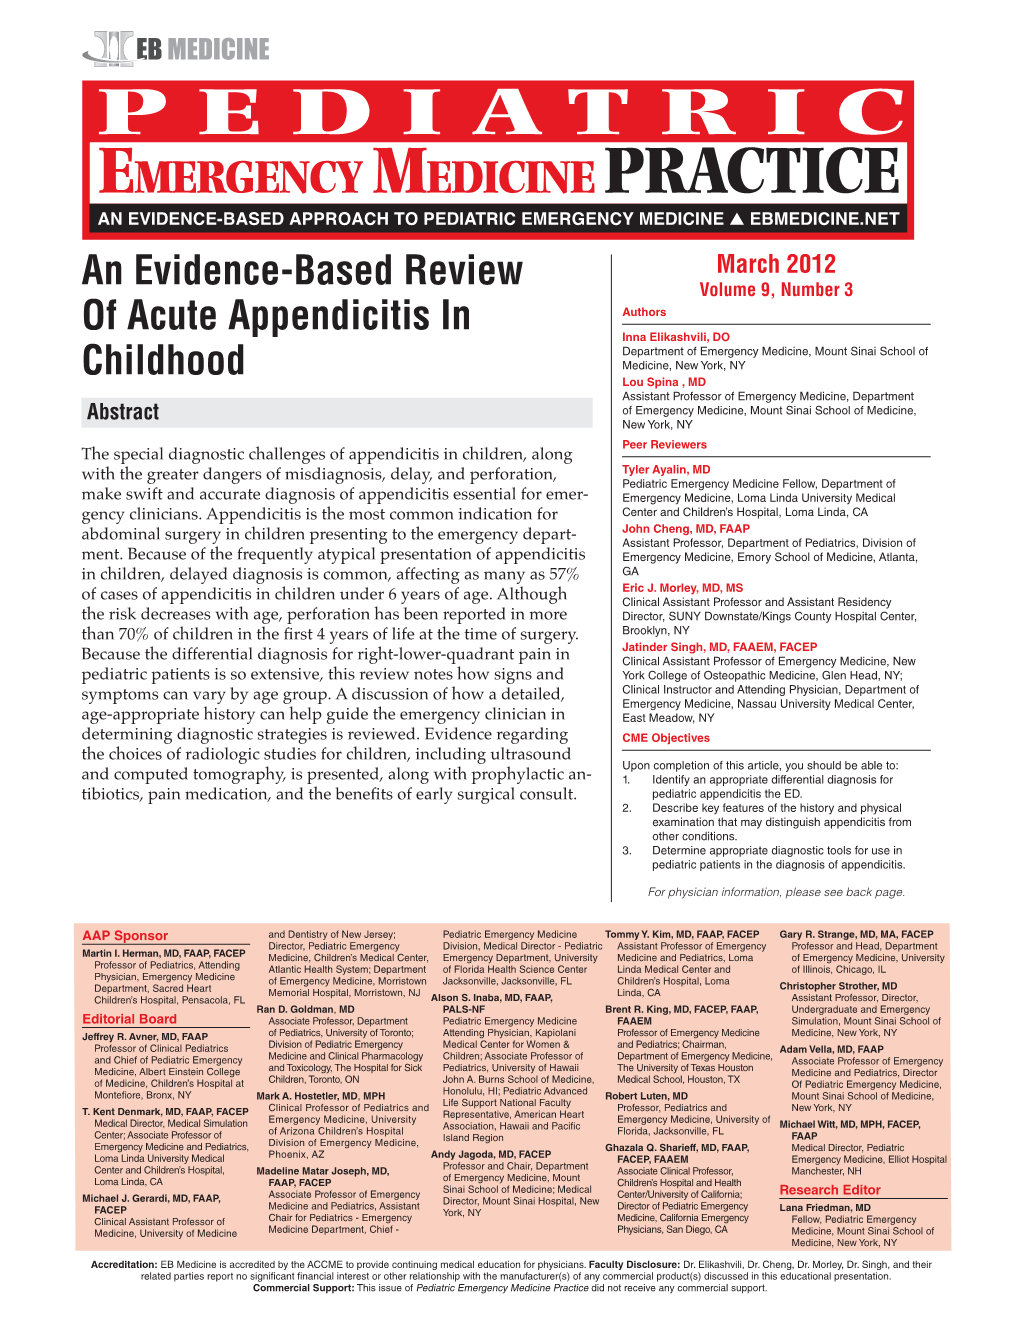 An Evidence-Based Review of Acute Appendicitis in Childhood